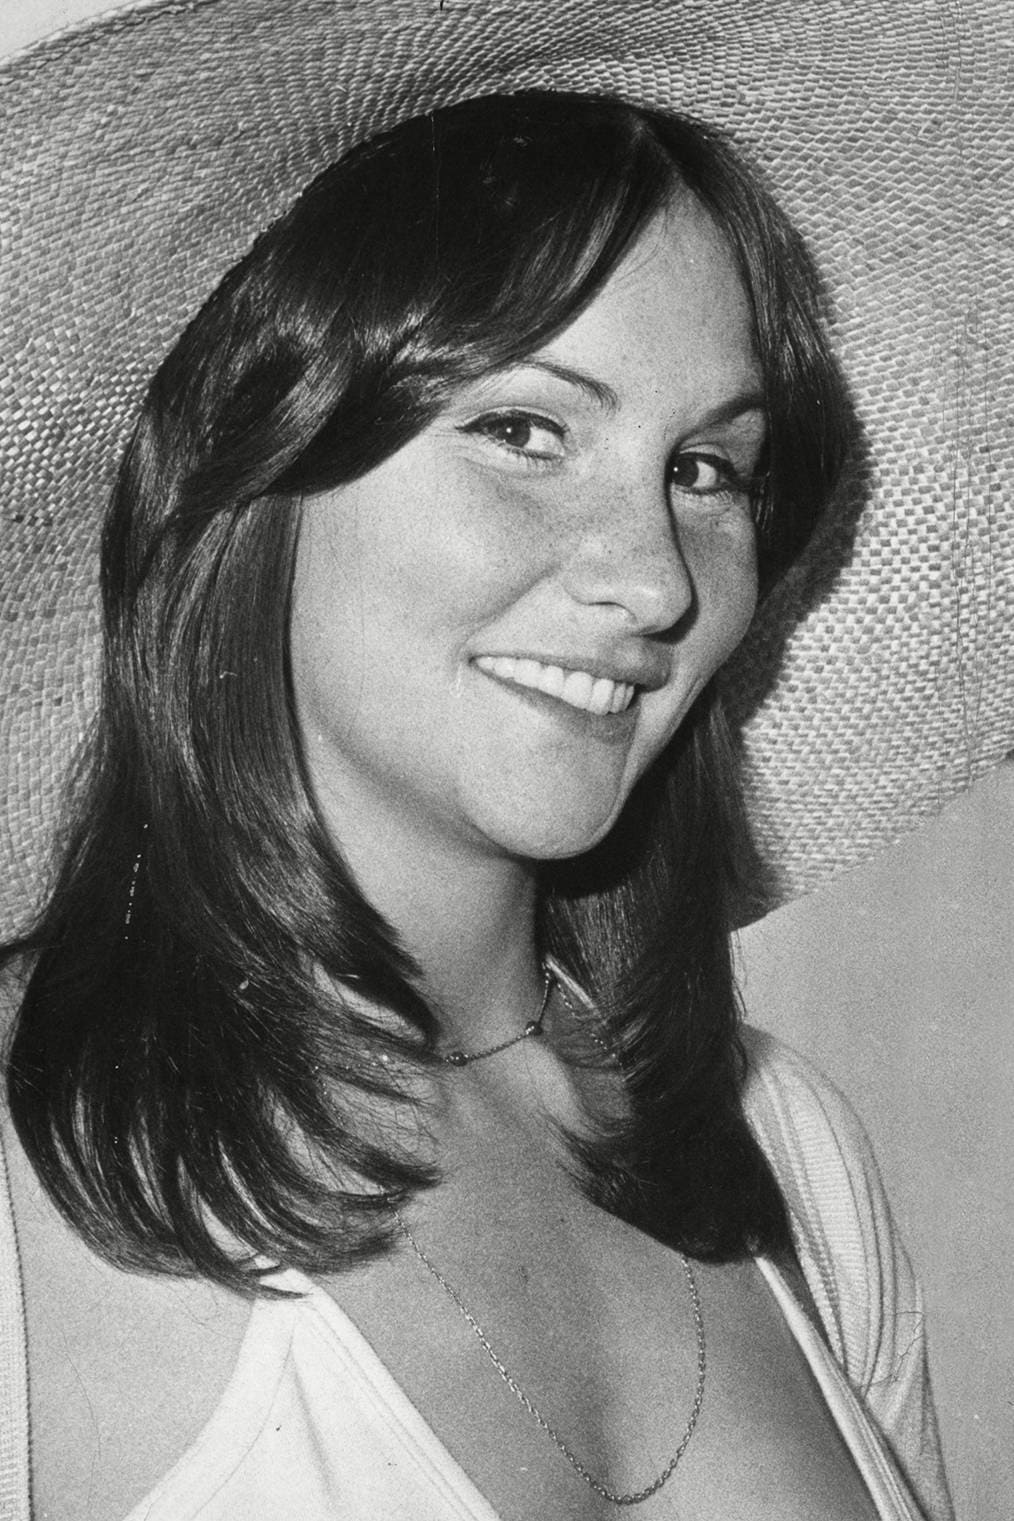 Linda lovelace pictures